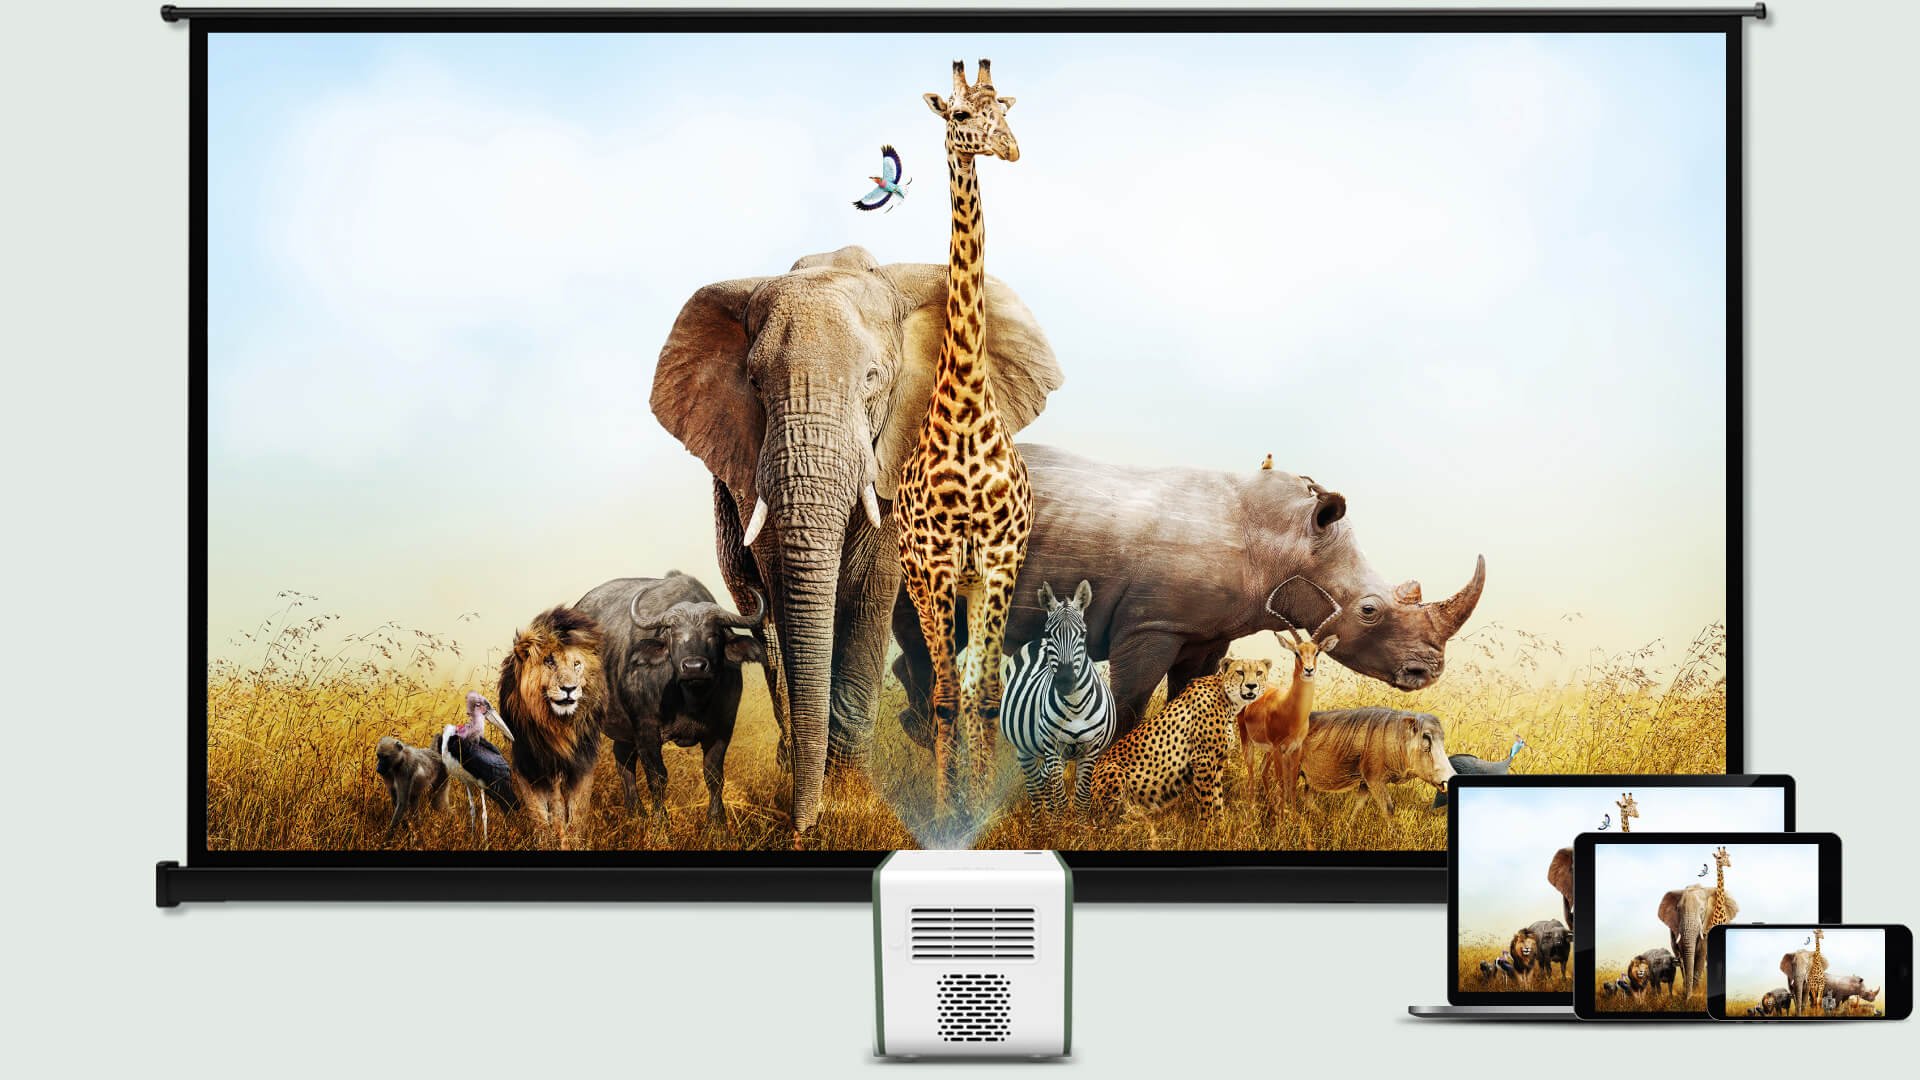 Full support for Apple AirPlay and Google Chromecast